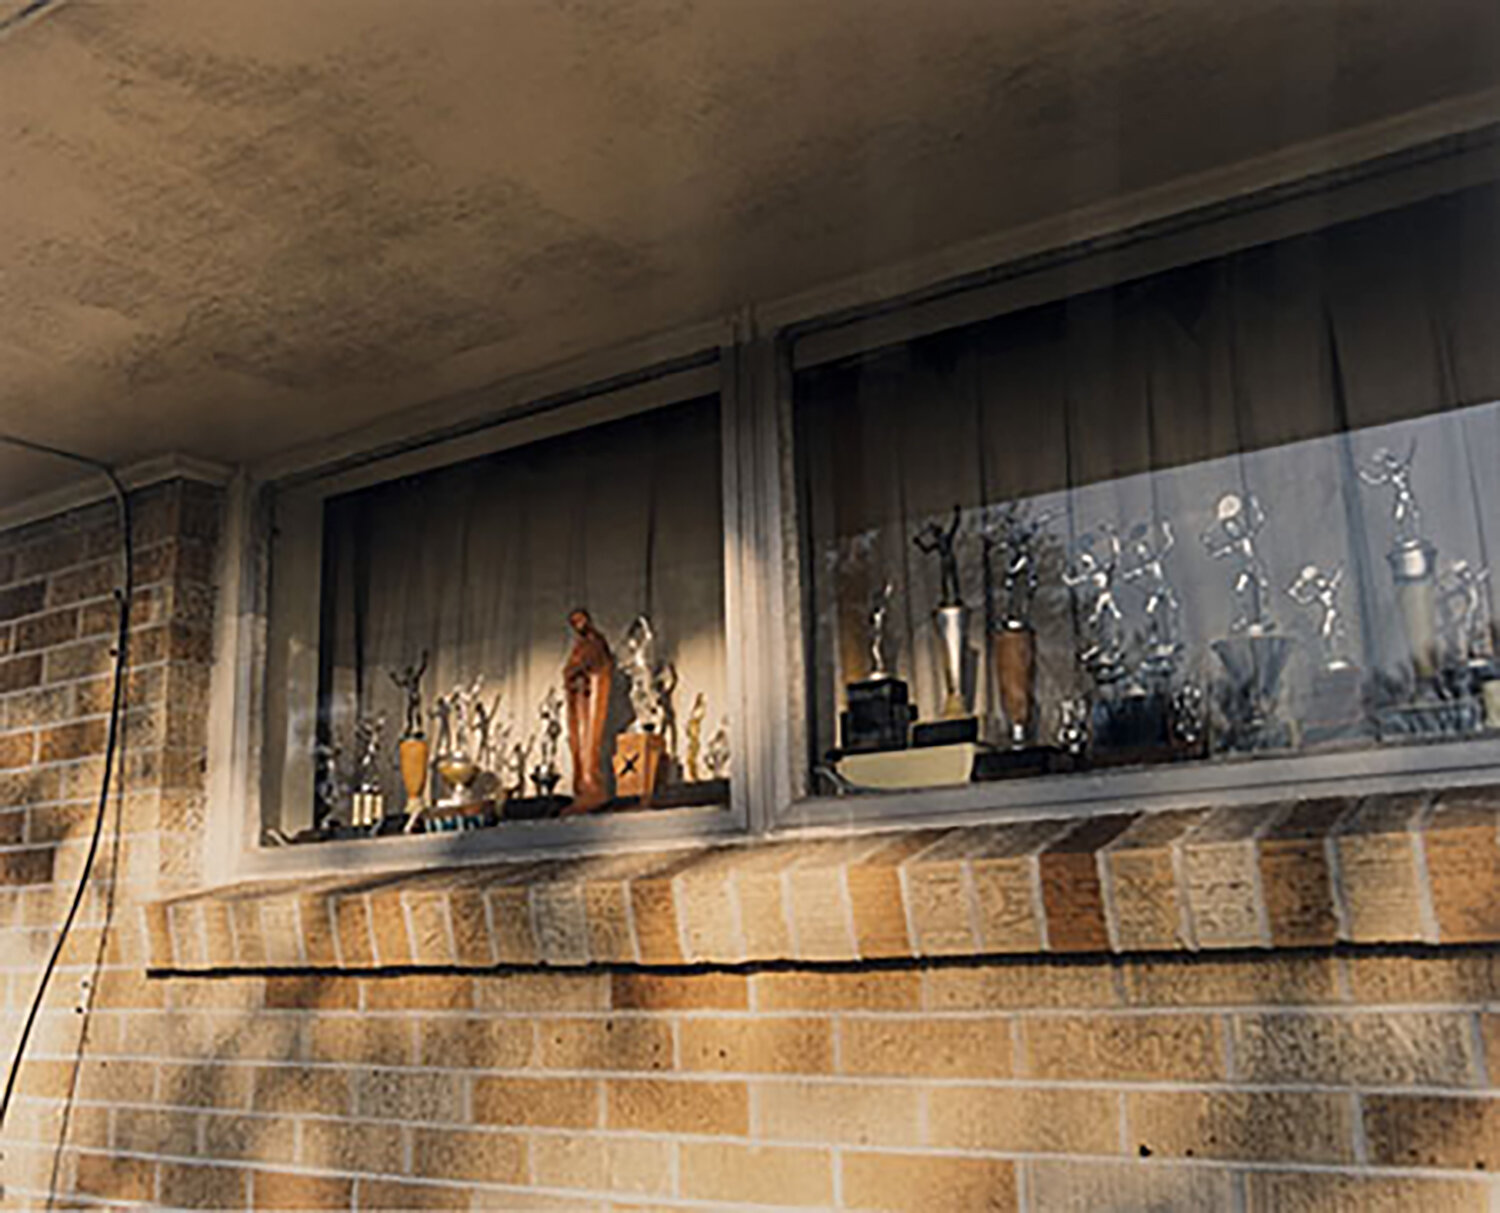   Trophies, Metairie, LA  Image: 1994/printed: 1997 Edition: 1/25 Chromogenic Print 17 3/4 × 21 3/4 in. (image size) The Do Good Fund, Inc., 2015-030 